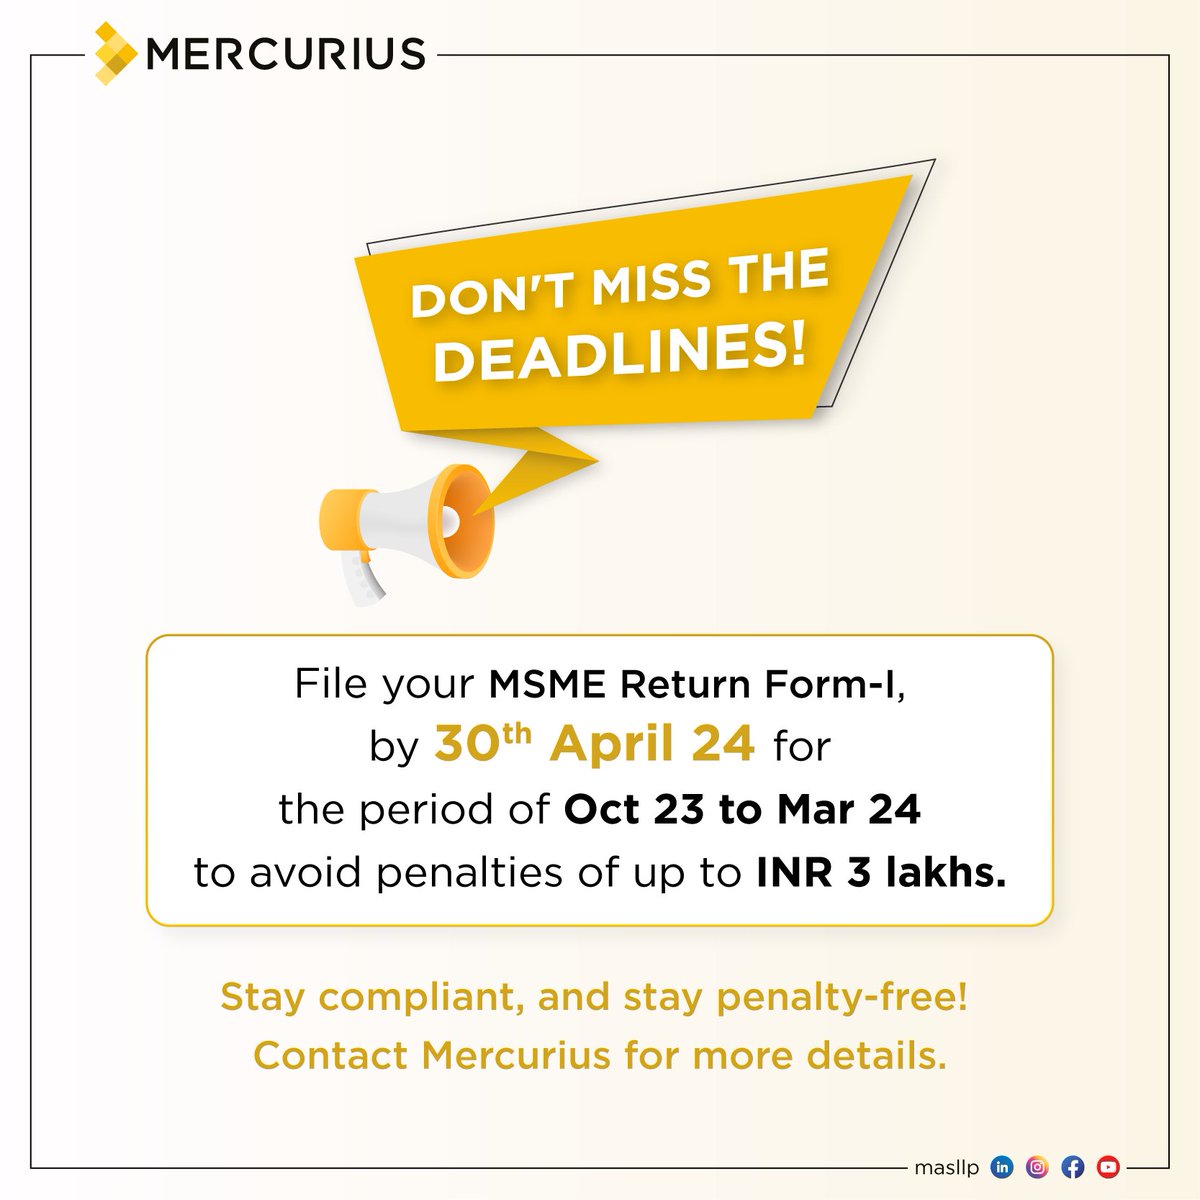 Time's ticking! File MSME Form-I by April 30 to dodge penalties!

#msmereturn  #msmeindia #MSME #msmecompliance  #Mercurius